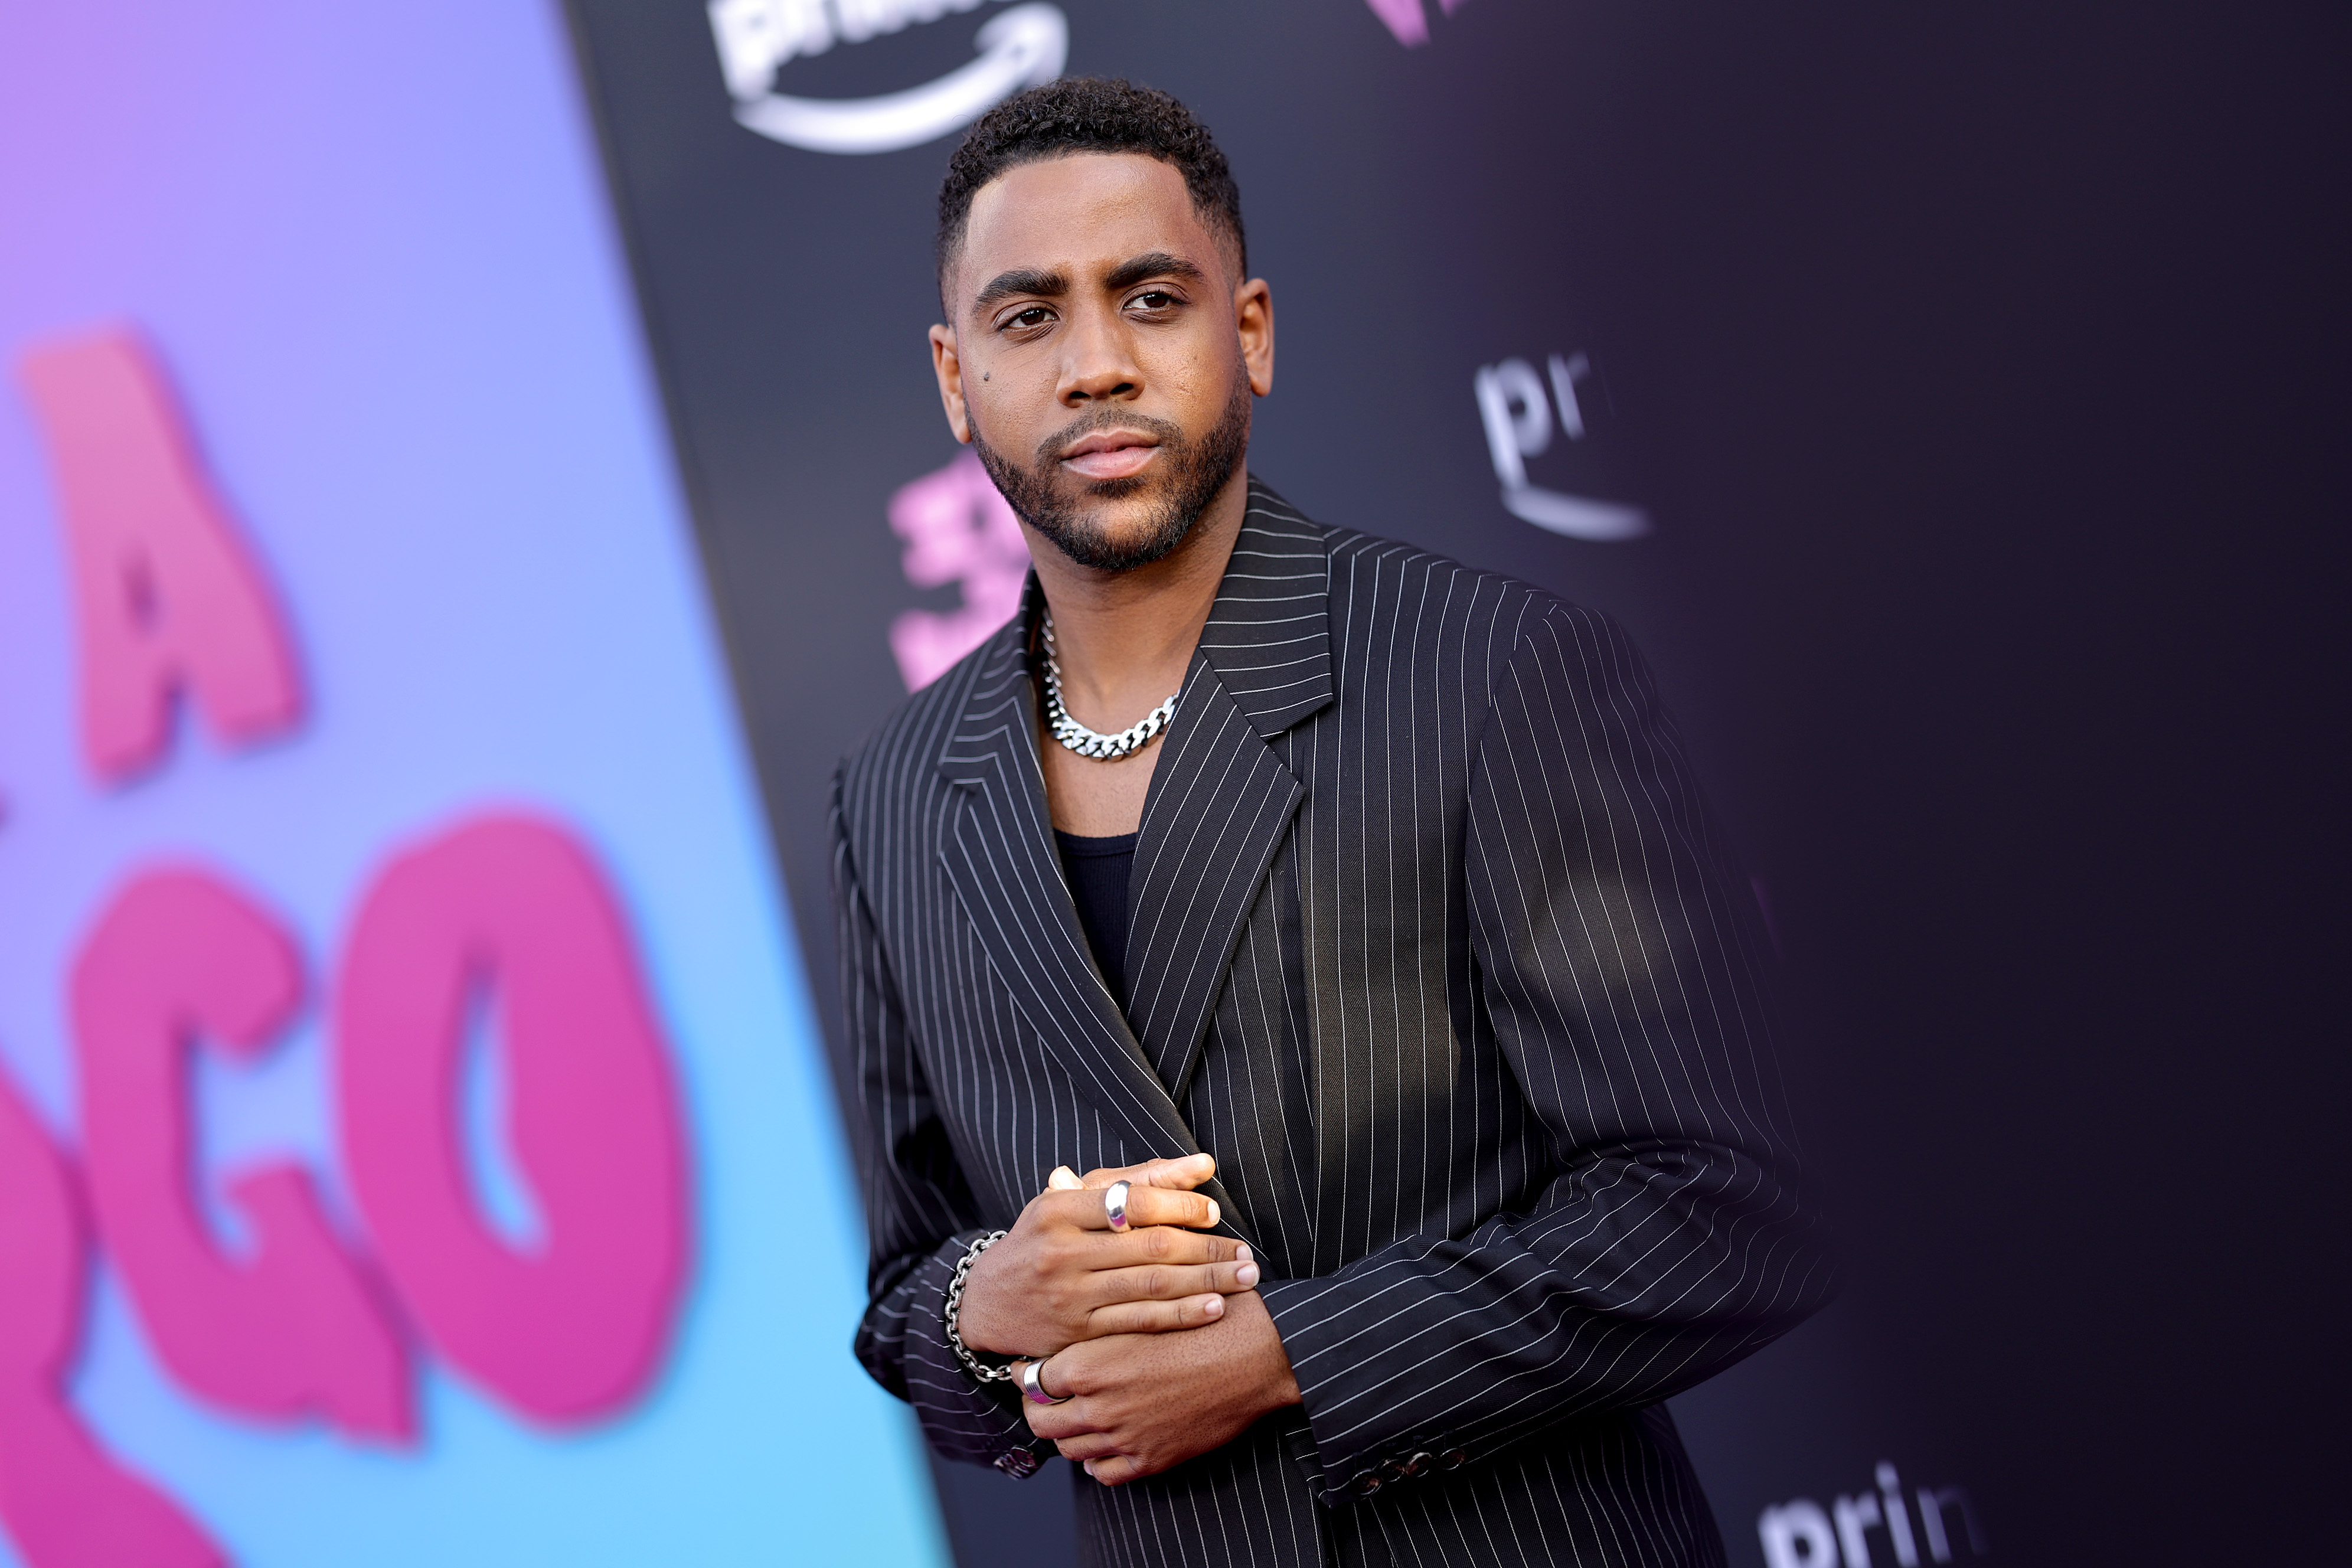 Jharrel Jerome at the premiere of "I'm a Virgo" on June 21, 2023, in Los Angeles, California. | Source: Getty Images